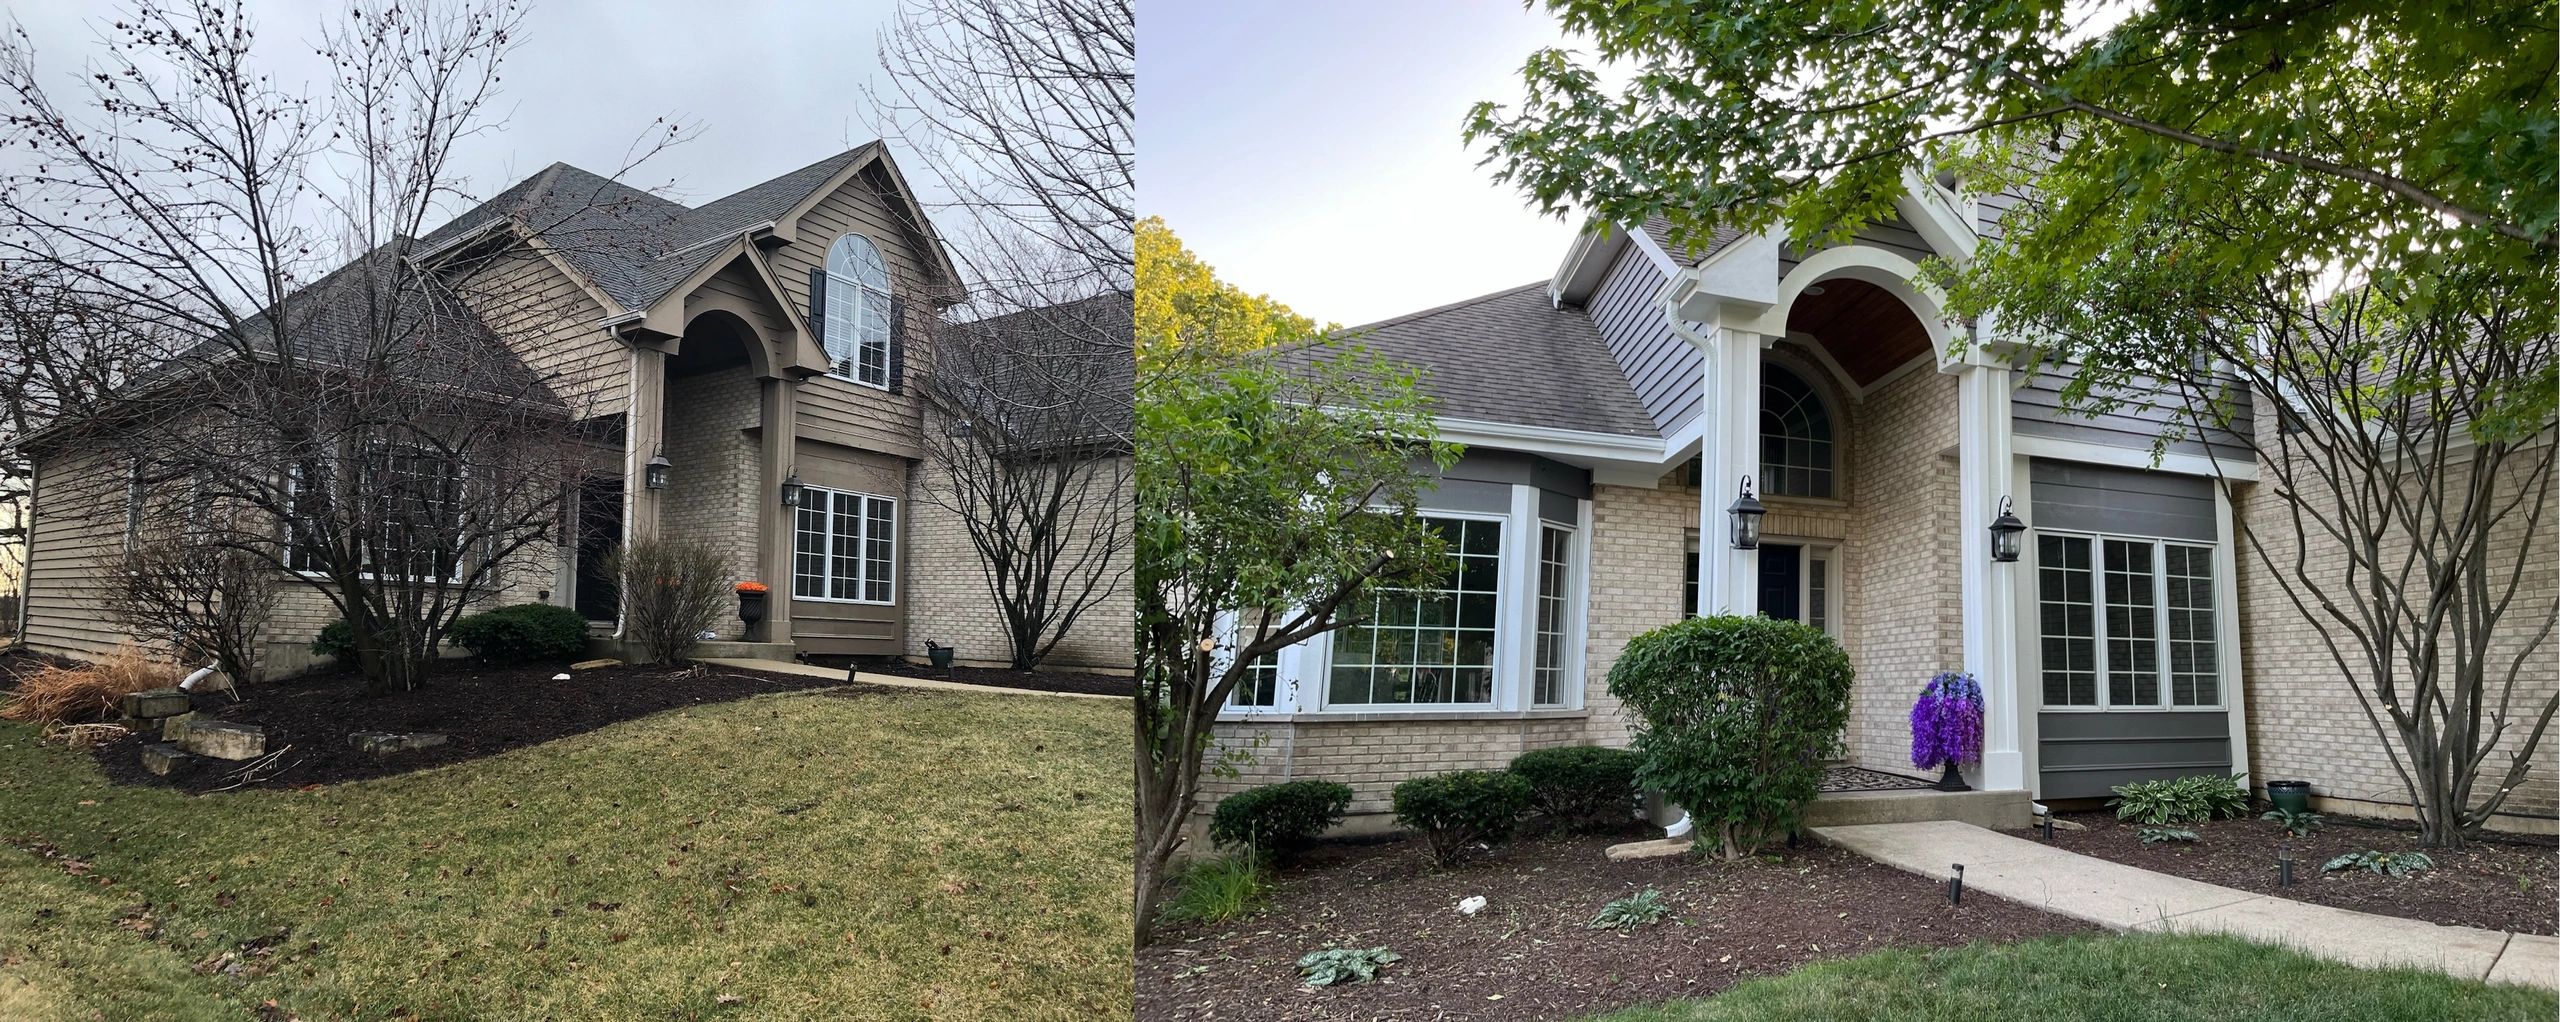 exterior remodel before and after grey and white siding